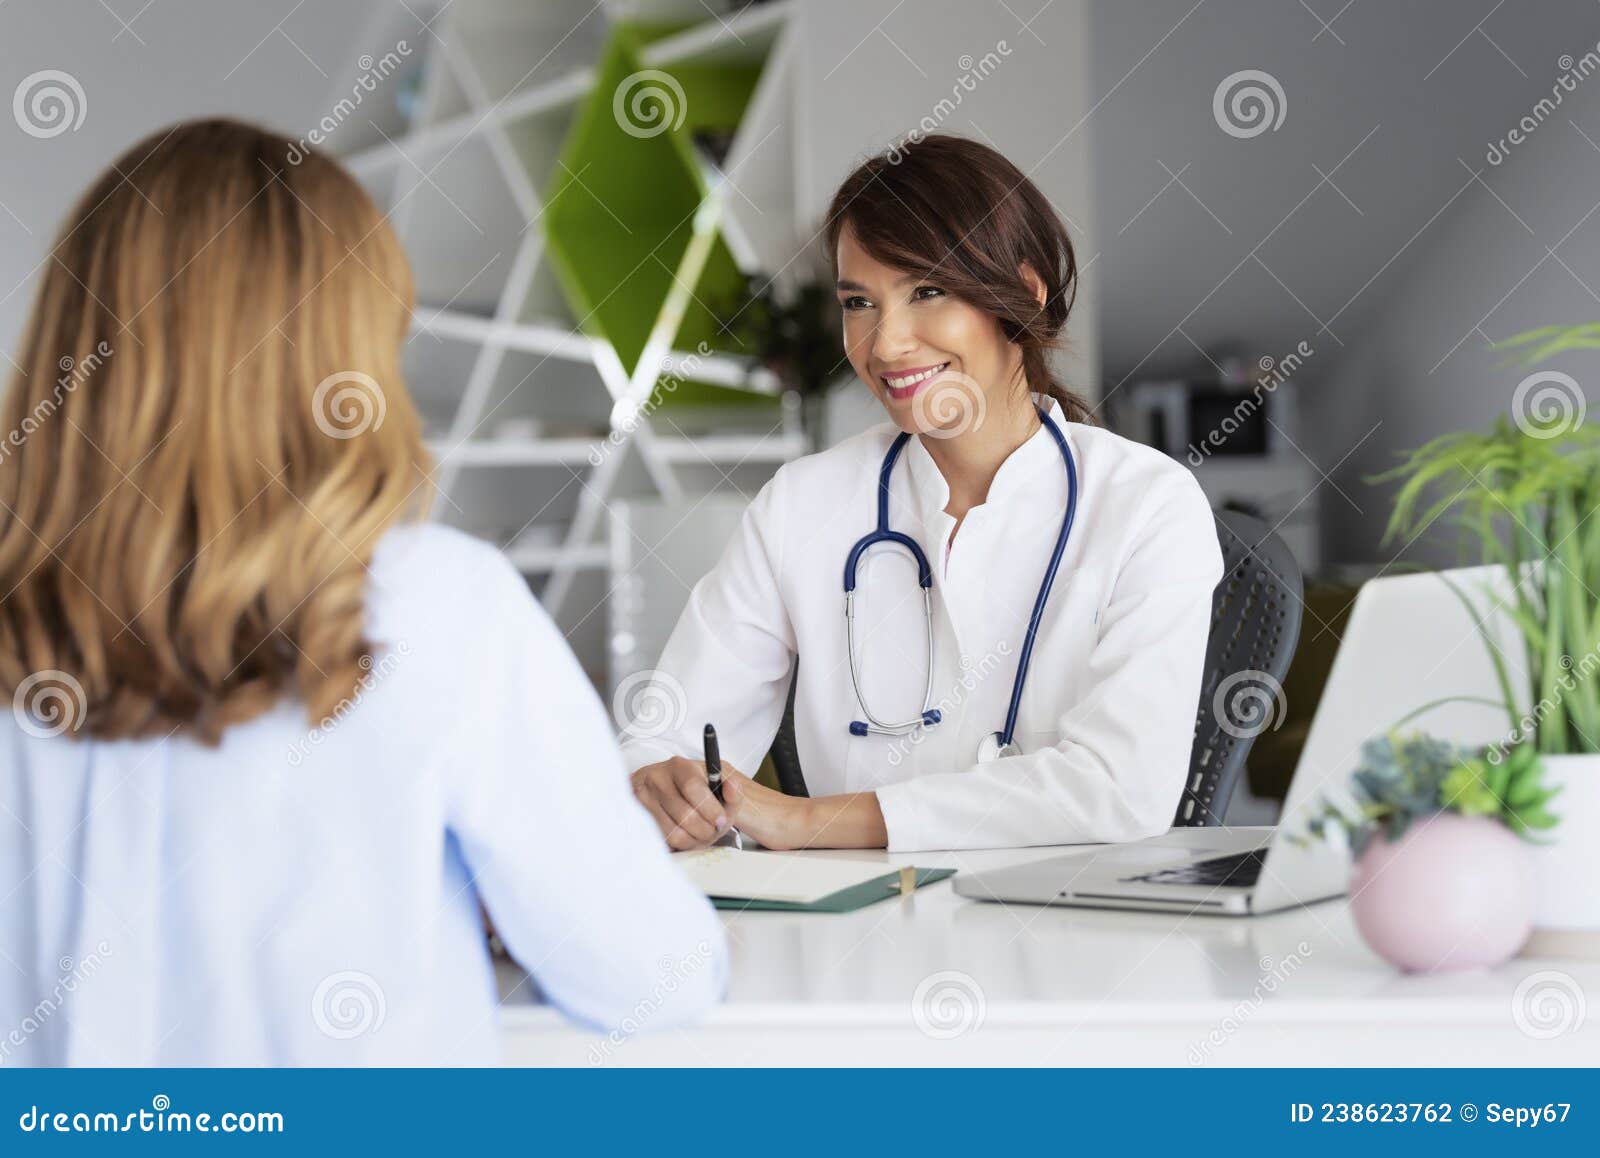 female doctor consulting her patient while sitting at desk in doctor`s office